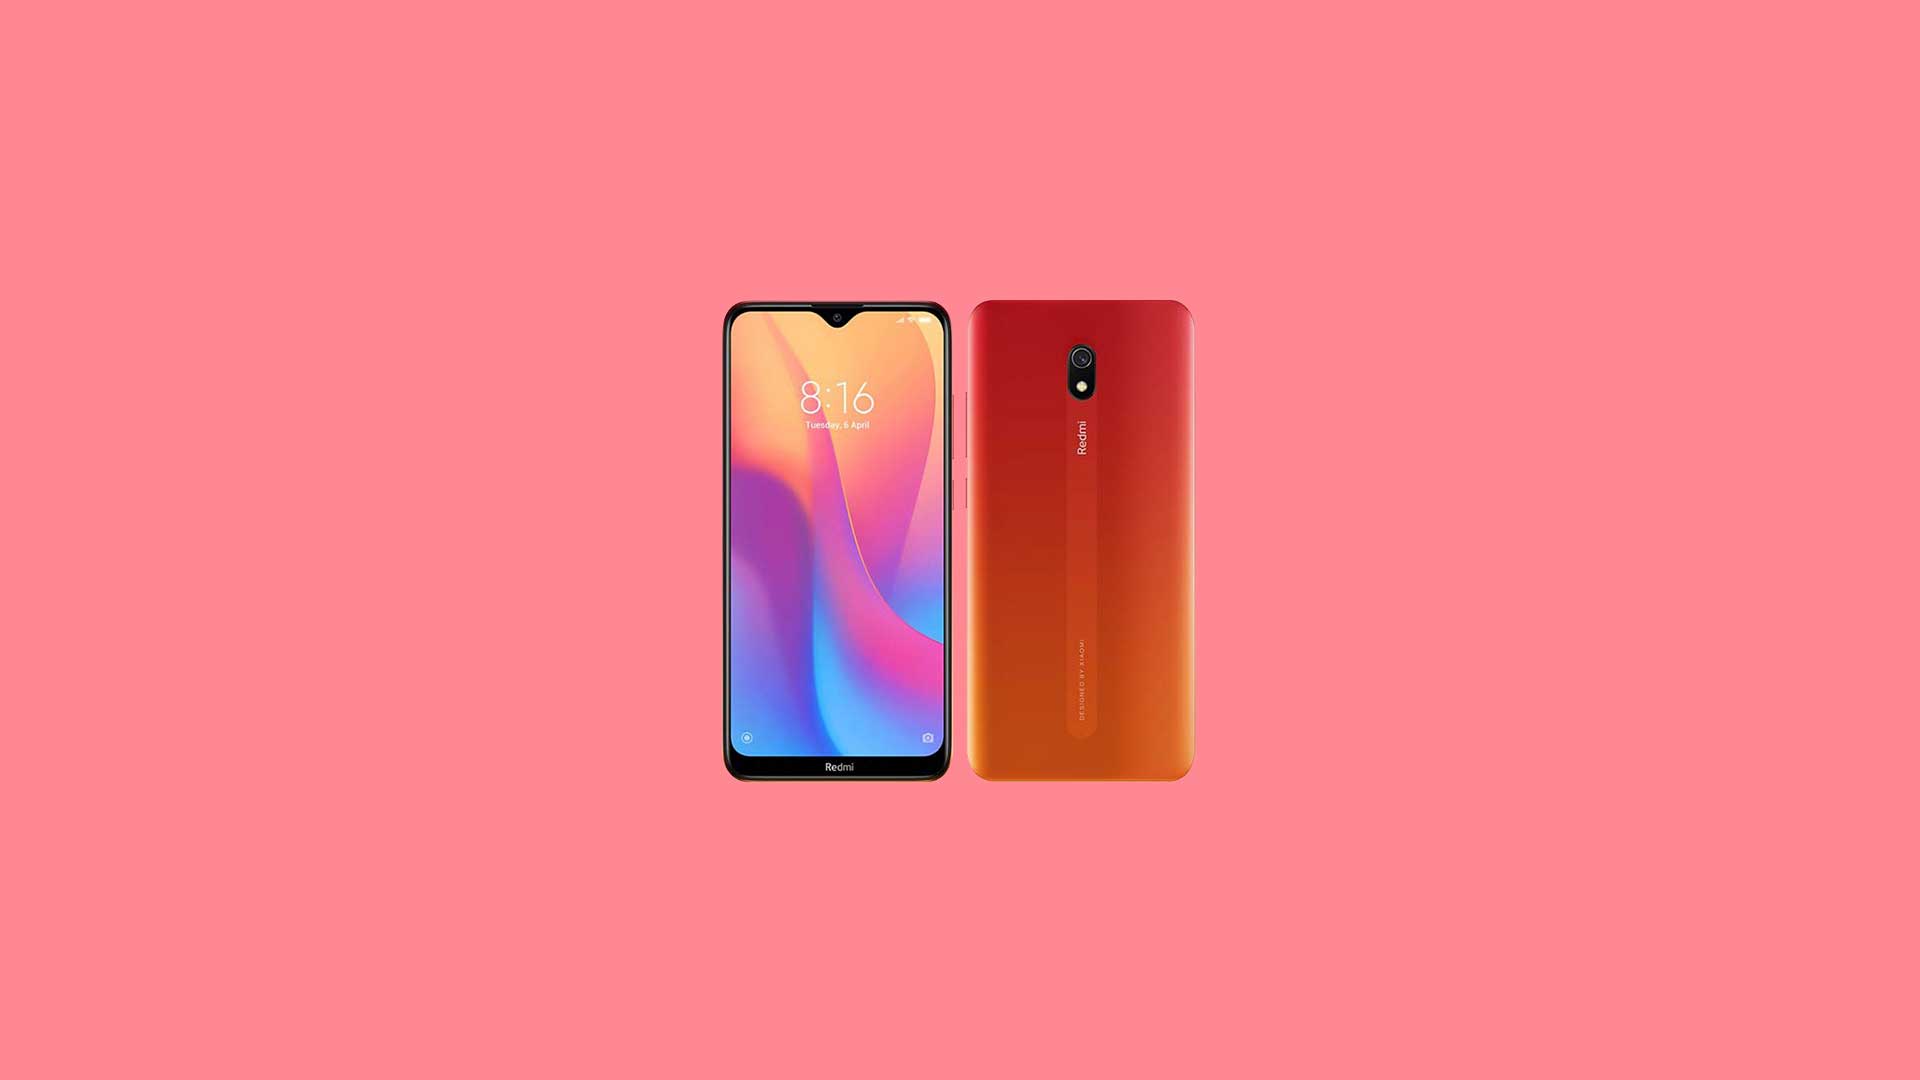 Will Xiaomi Redmi 8A and 8A Pro Get Android 12 Update?